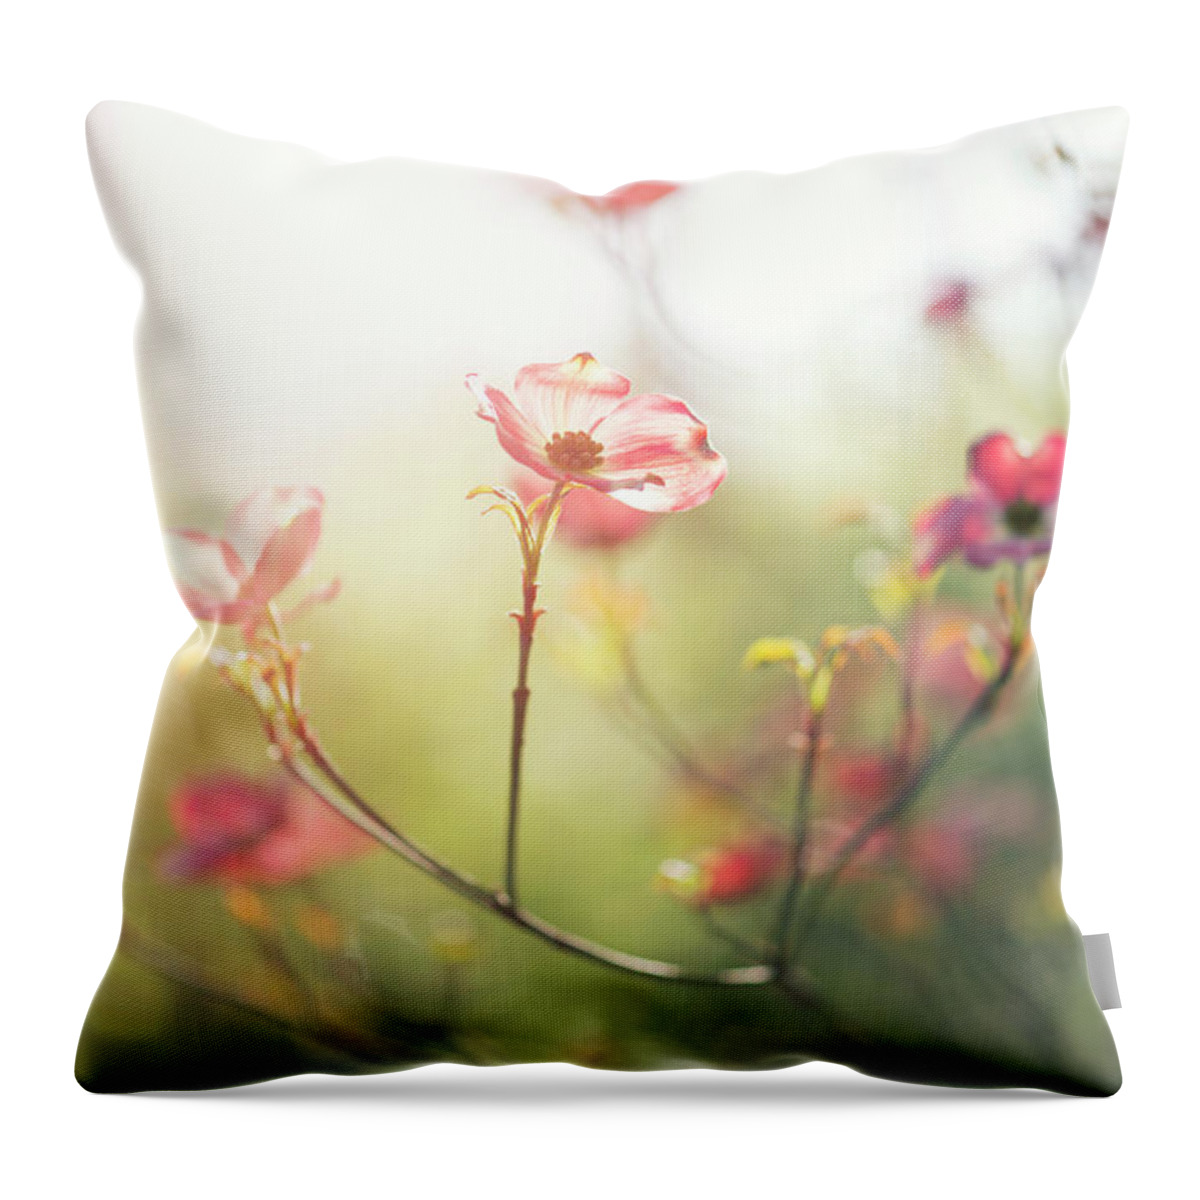 Dogwood Throw Pillow featuring the photograph Morning Light Backlighting A Pink by Nkbimages